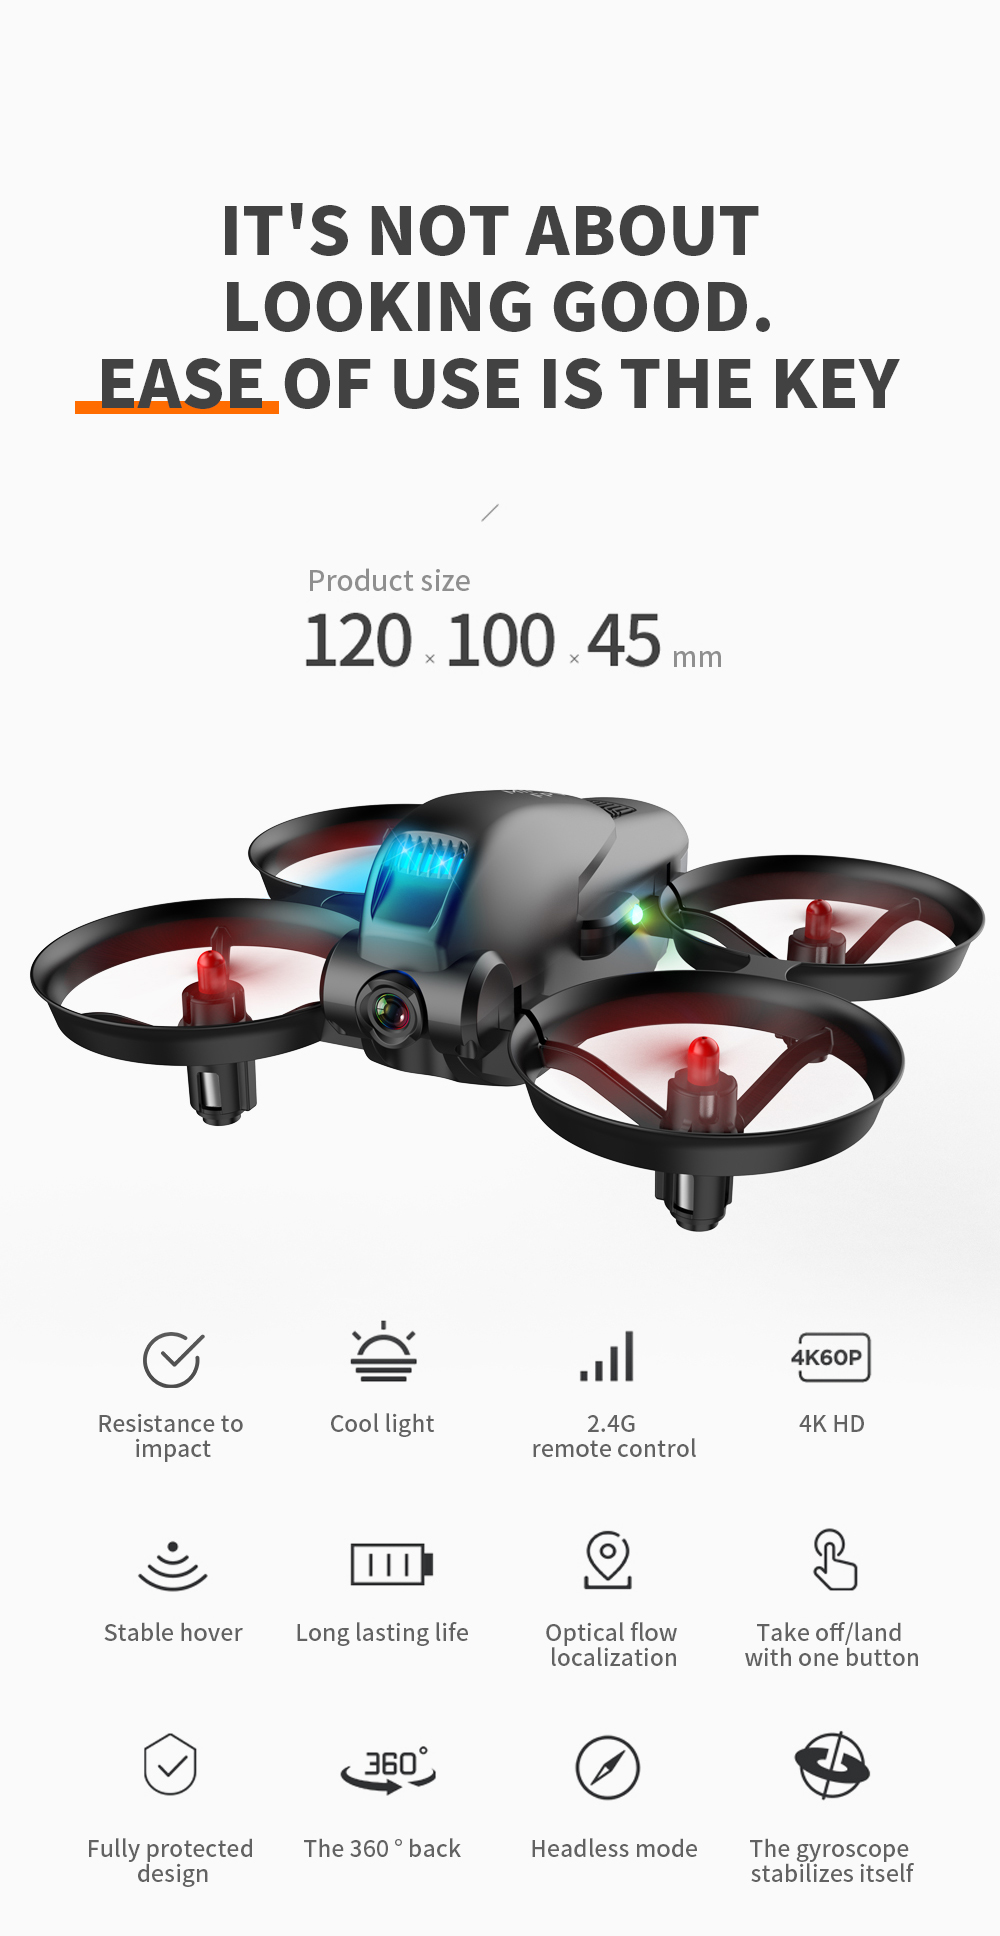 KF615-WIFI-FPV-with-4K-Dual-Camera-Optical-Flow-Positioning-Headless-Mode-Gyro-self-stabilization-RC-1882626-2